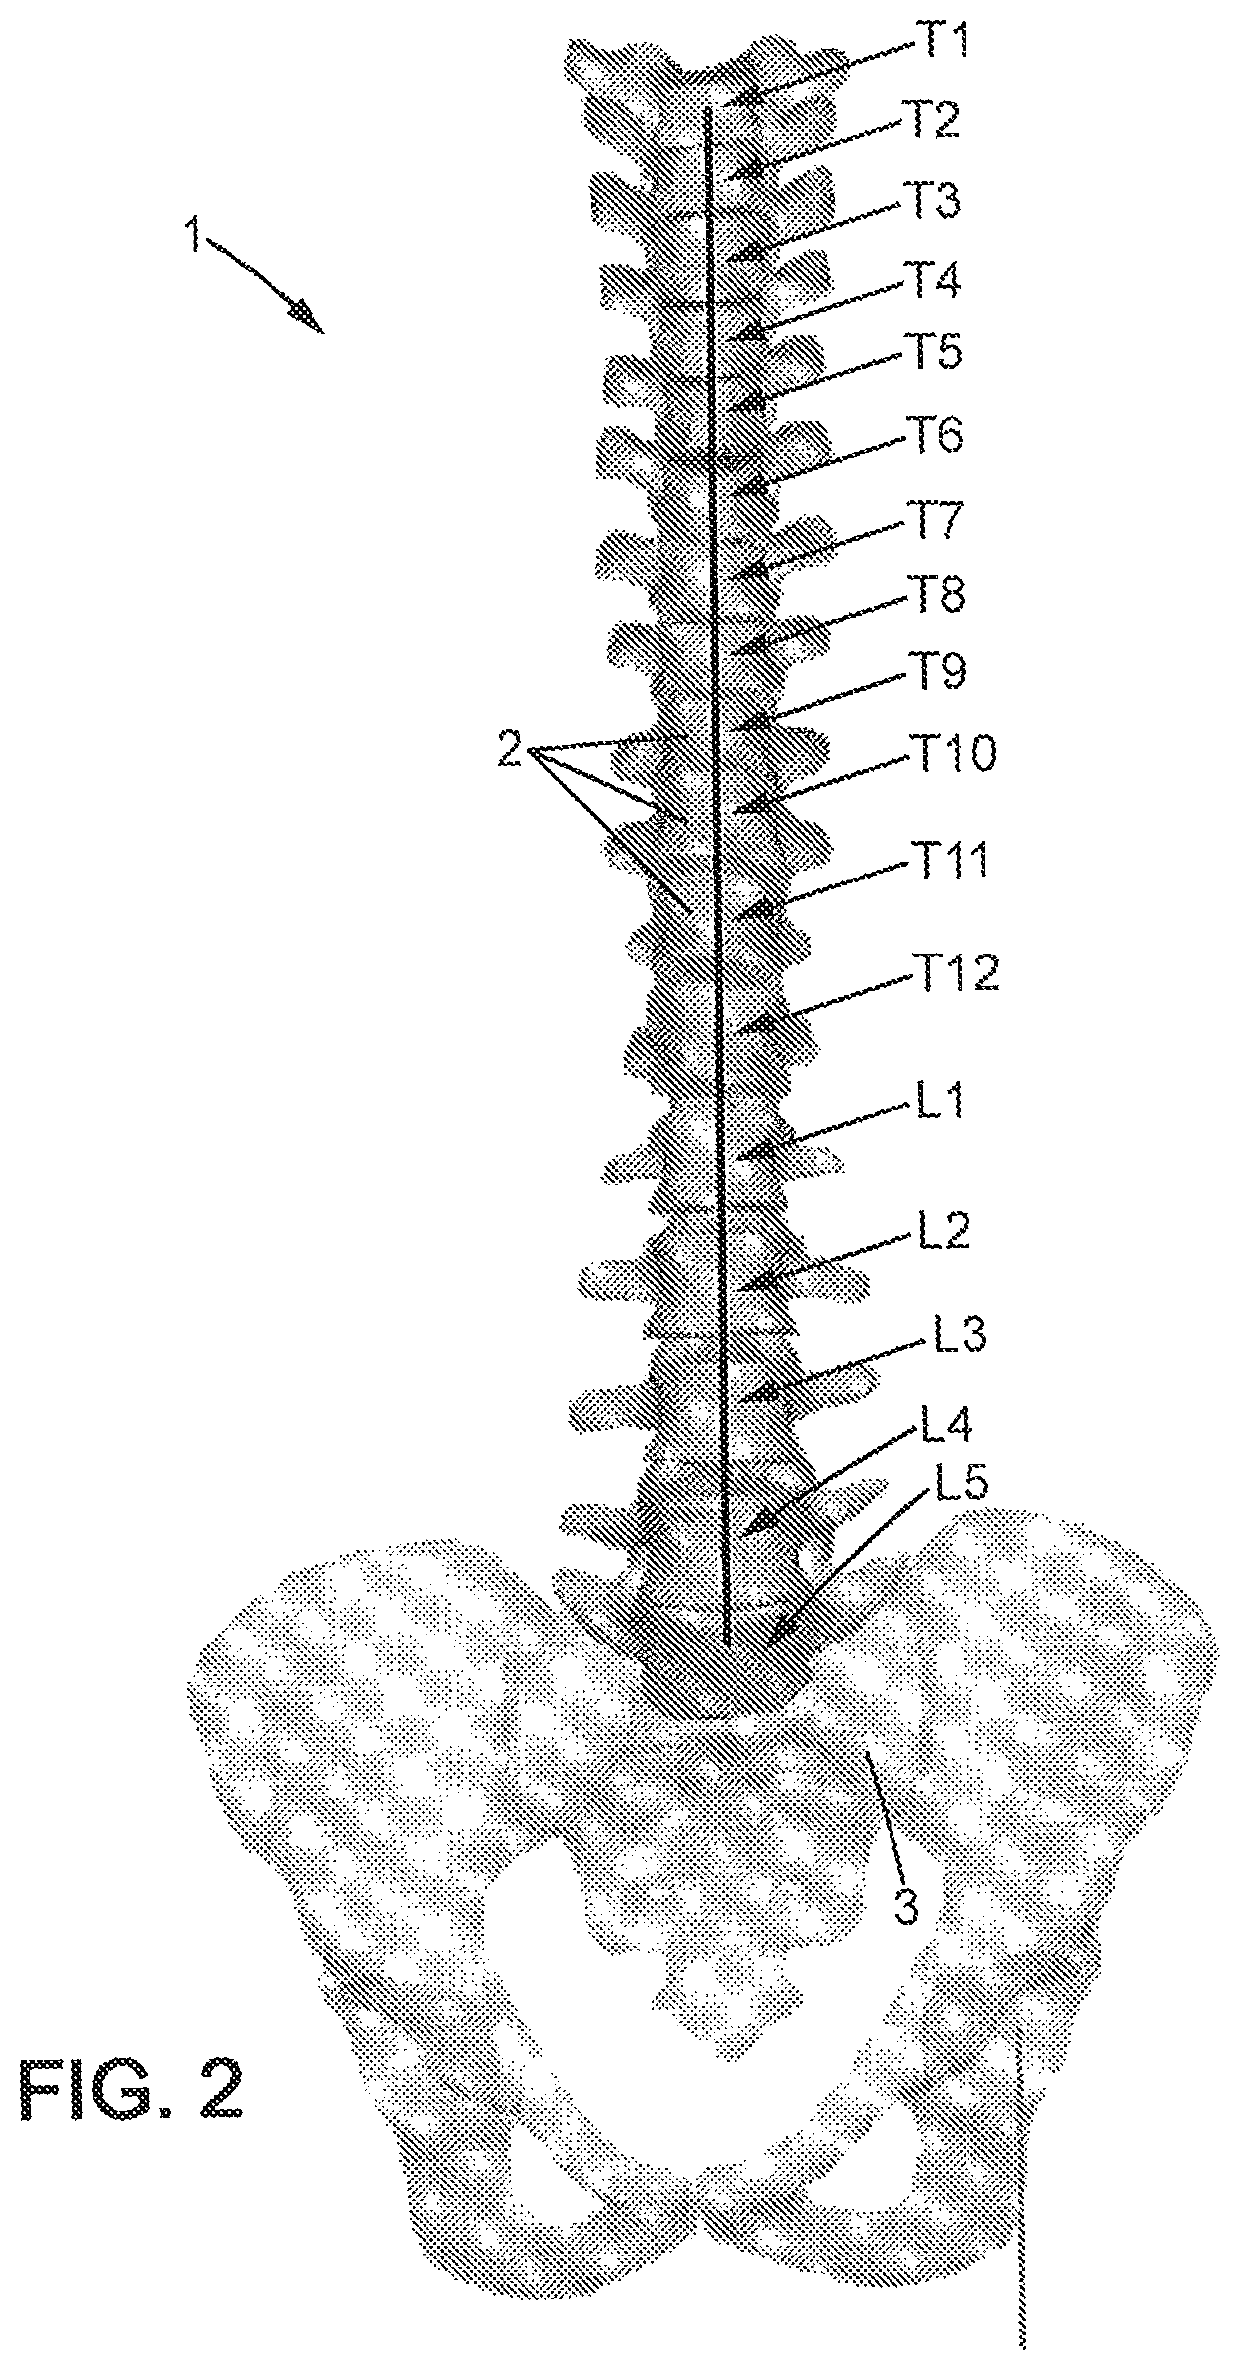 Method of preoperative planning to correct spine misalignment of a patient